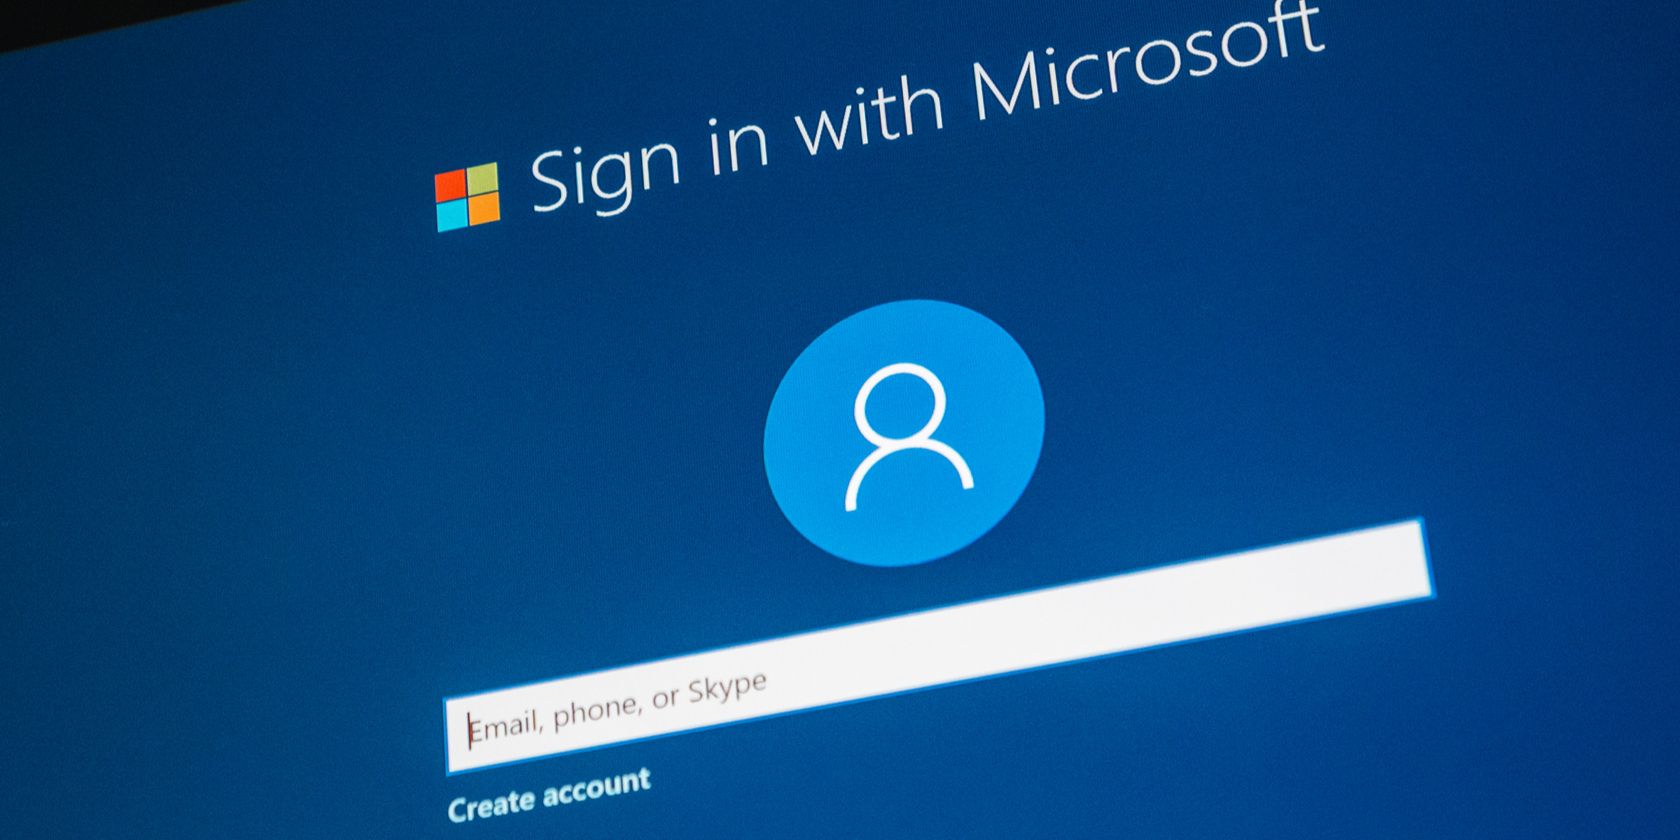 The Microsoft account sign-in page